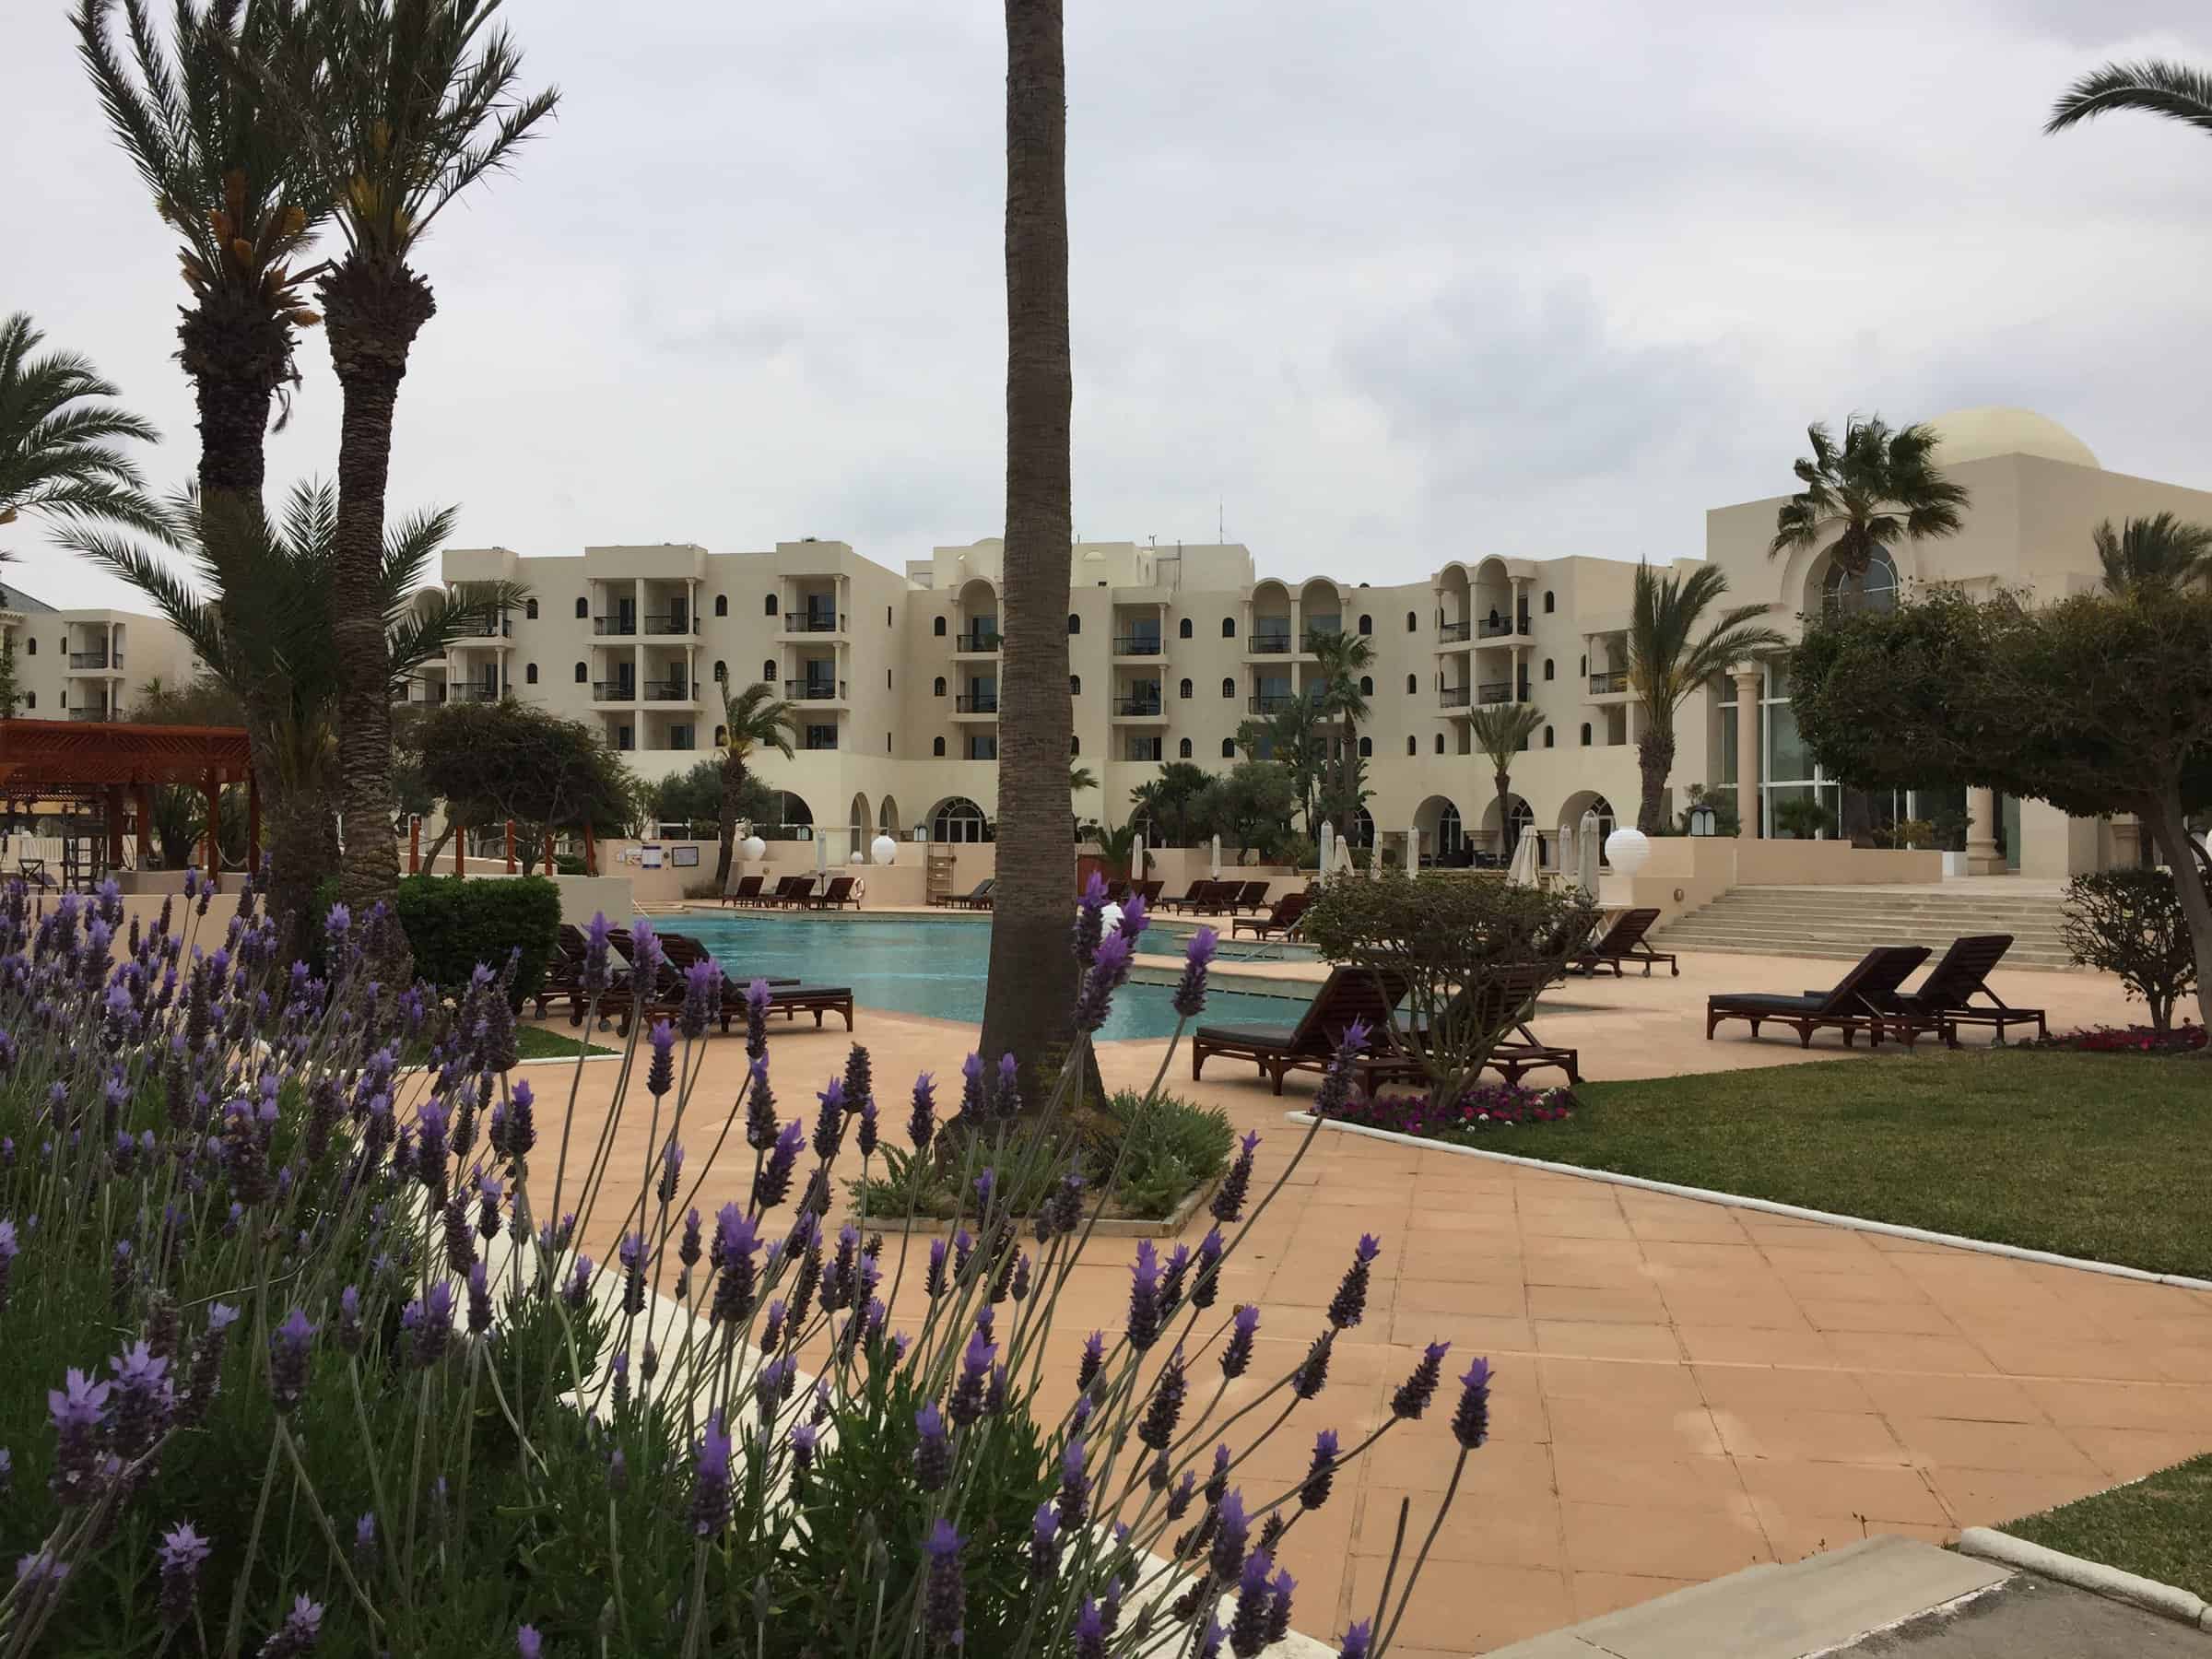 A serene view of a resort in Tunisia, featuring a large swimming pool surrounded by sun loungers and palm trees. The foreground showcases blooming purple lavender, while the background displays the resort's white, Mediterranean-style buildings. The overall scene exudes a tranquil and inviting atmosphere.